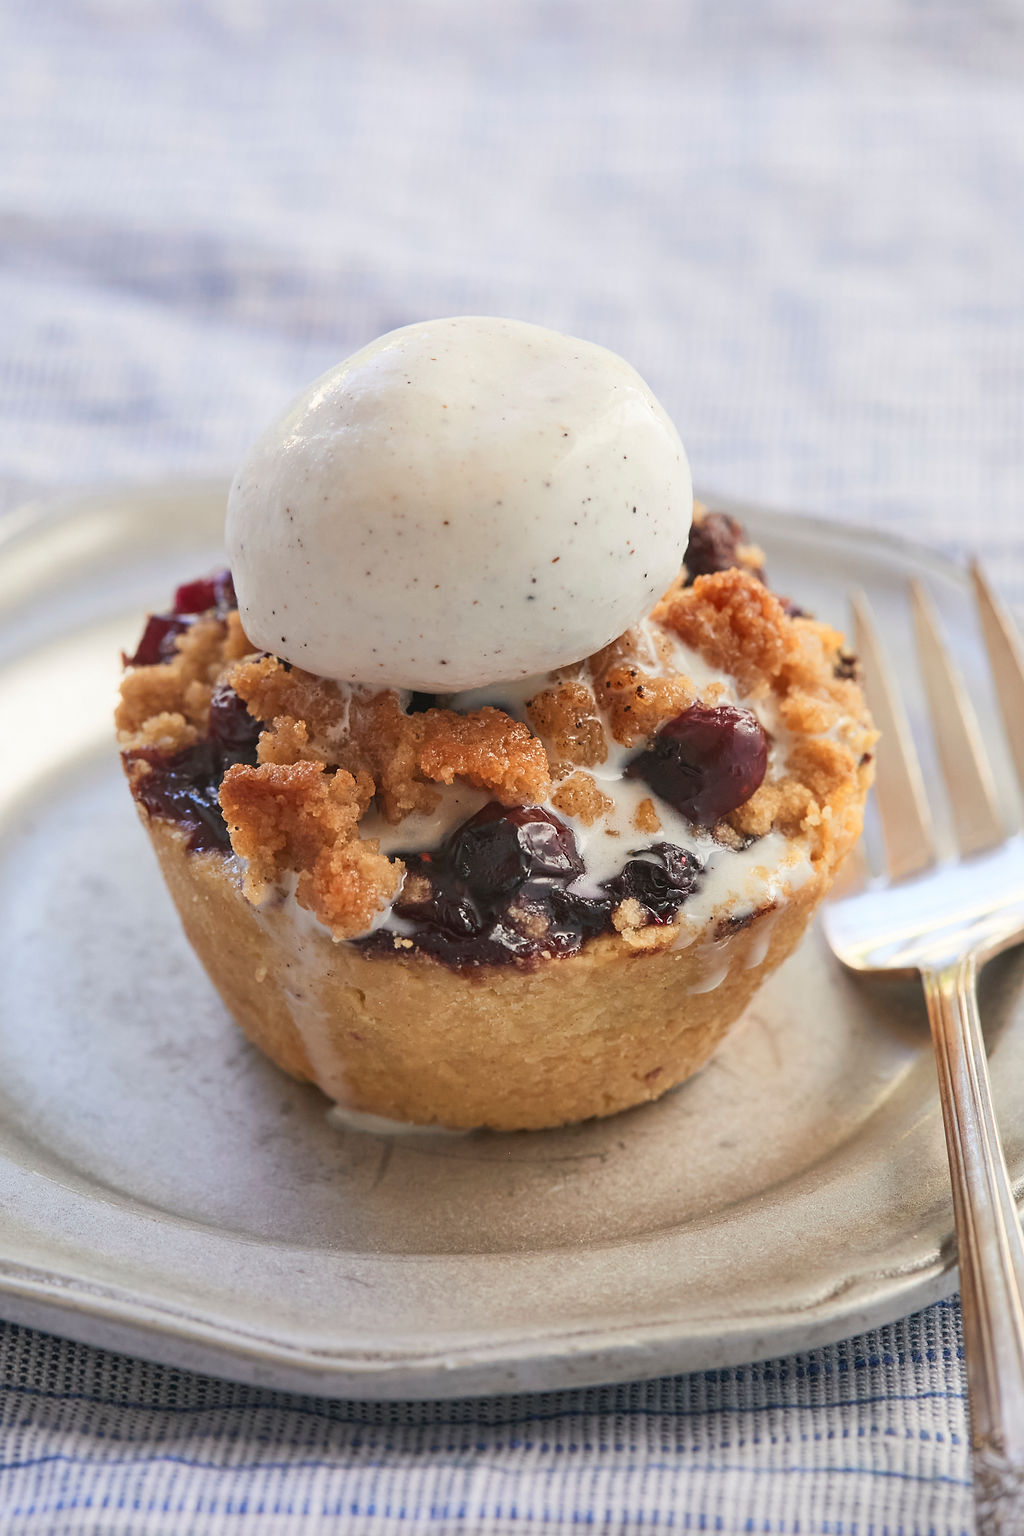 One Blueberry Crumb Pie topped with vanilla bean ice cream on a plate with a fork ready to take a bite.